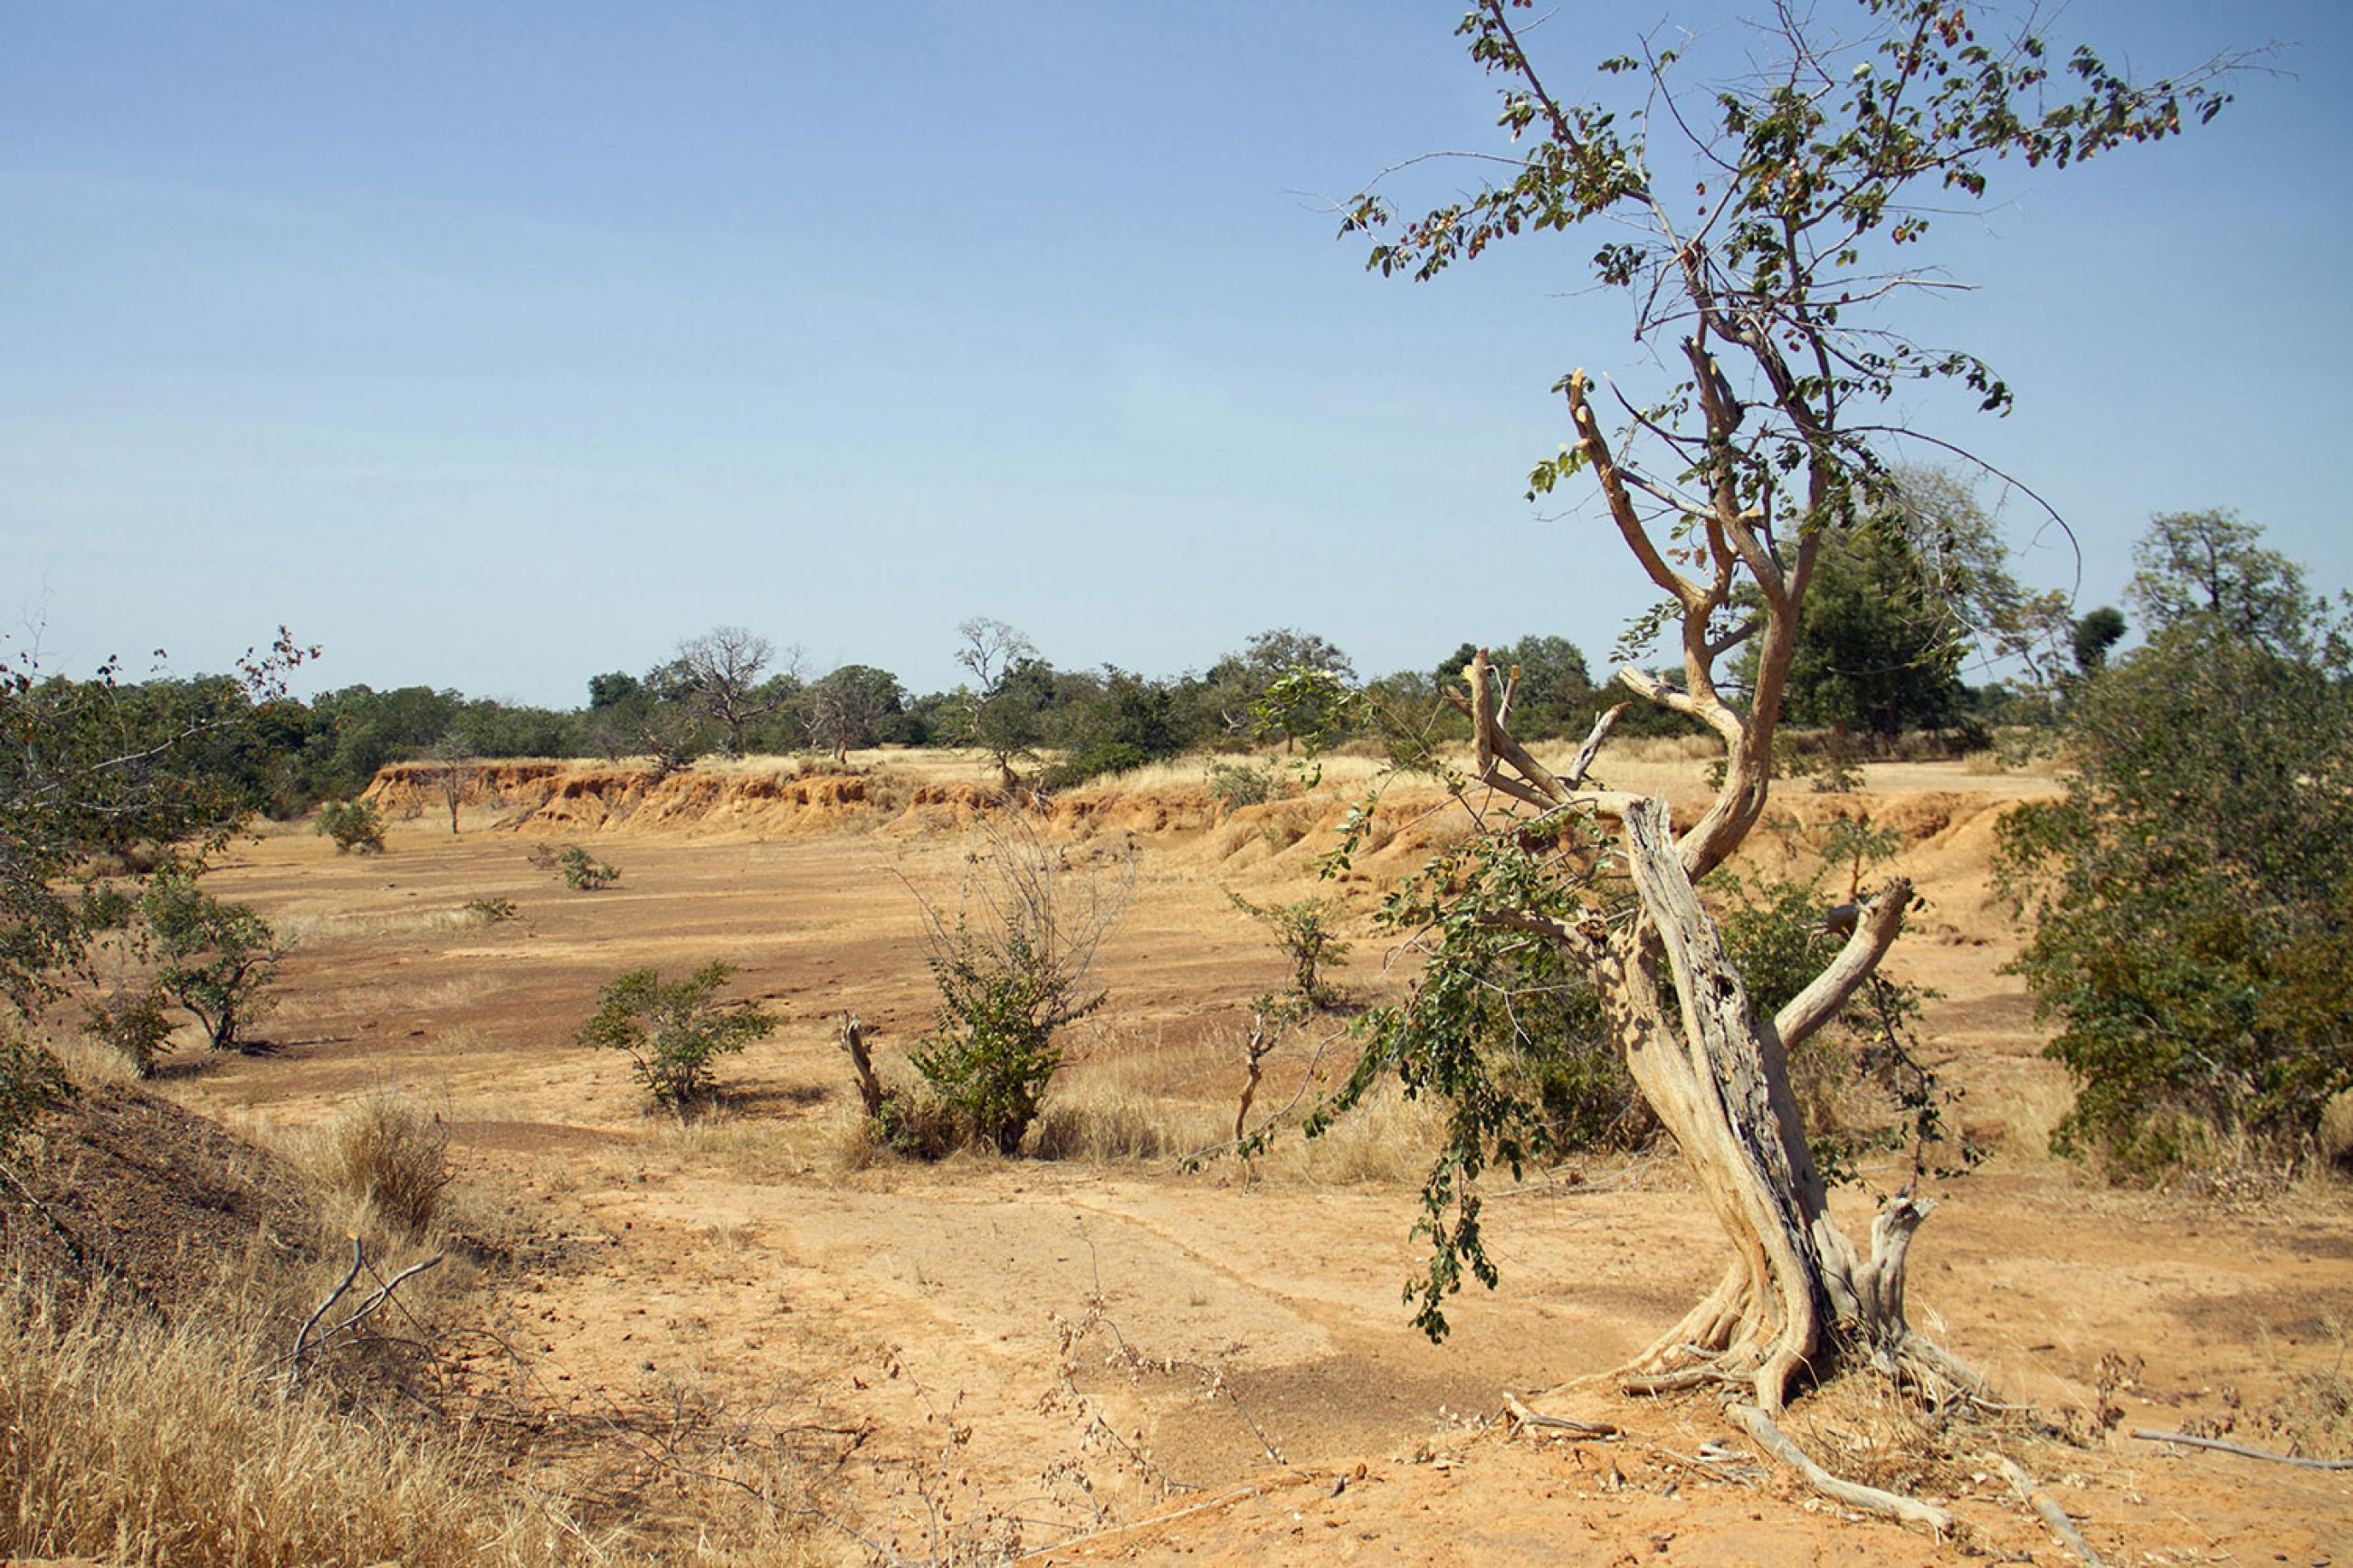 Parched land is pictured around the Lake Wegnia, in Sahel region of Koulikoro, Mali on November 22, 2019. Picture Shows a lonely tree, small and scrubby with many of its branches dead. It’s in a dry gully with a few other green scrubby bushes scattered in the frame—but mostly nothing but dry yellow dirt and sand everywhere the eye can see off into the distance. REUTERS/Arouna Sissoko